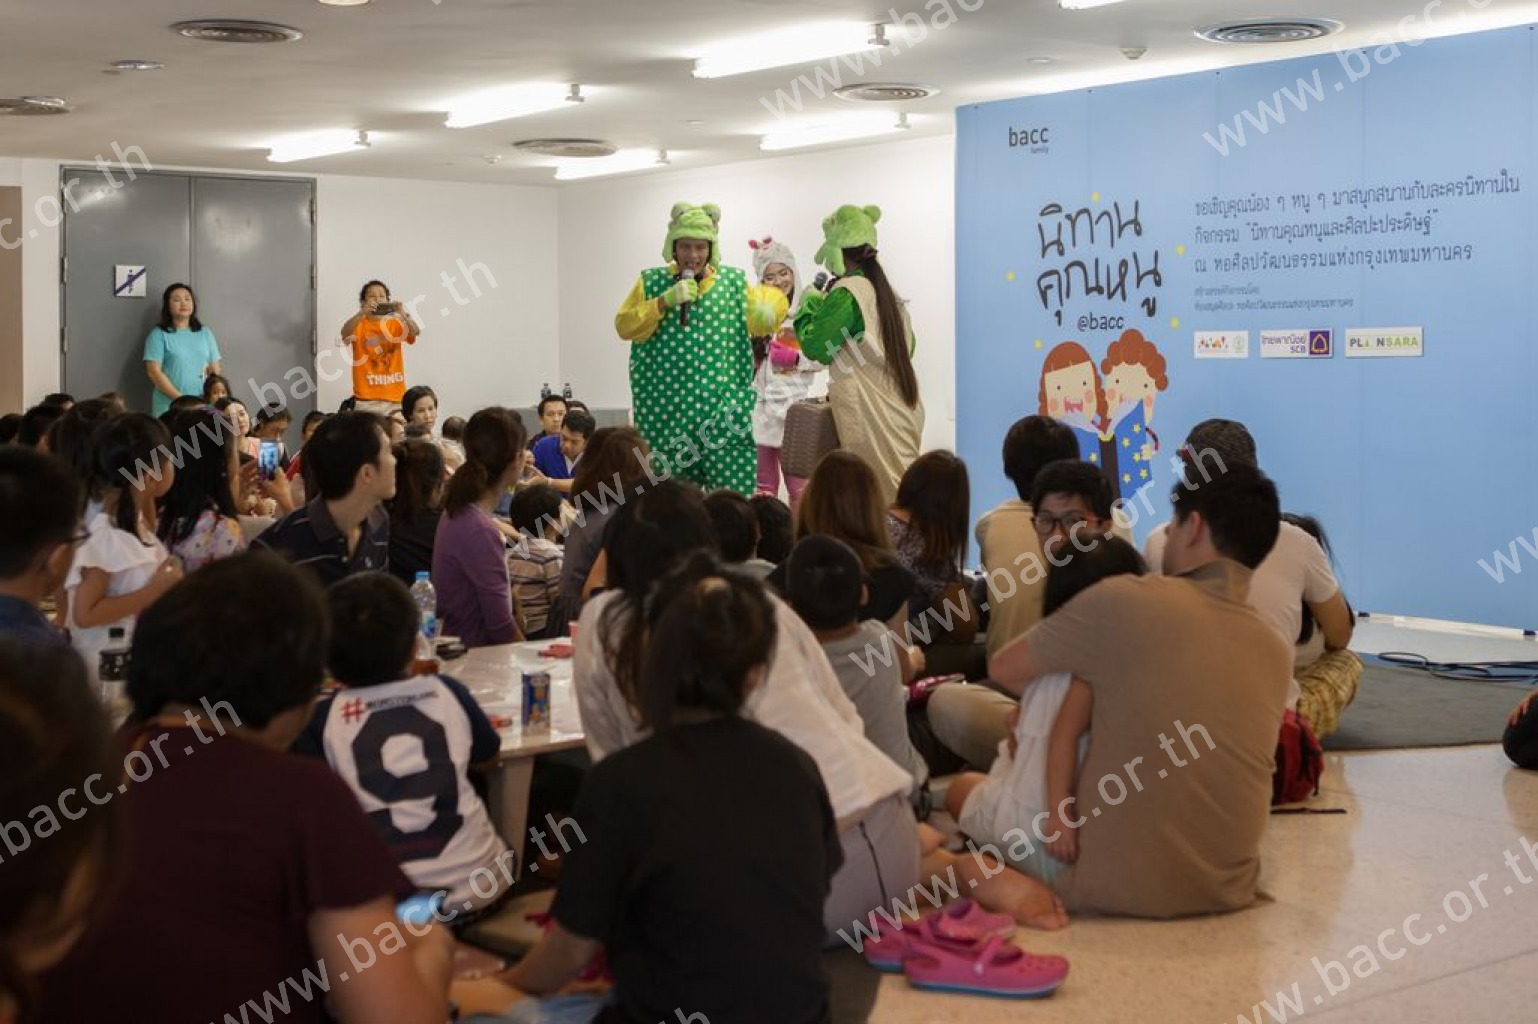 Storytelling Activity for Kids “The Arrogant Frog and the Humble Frog”